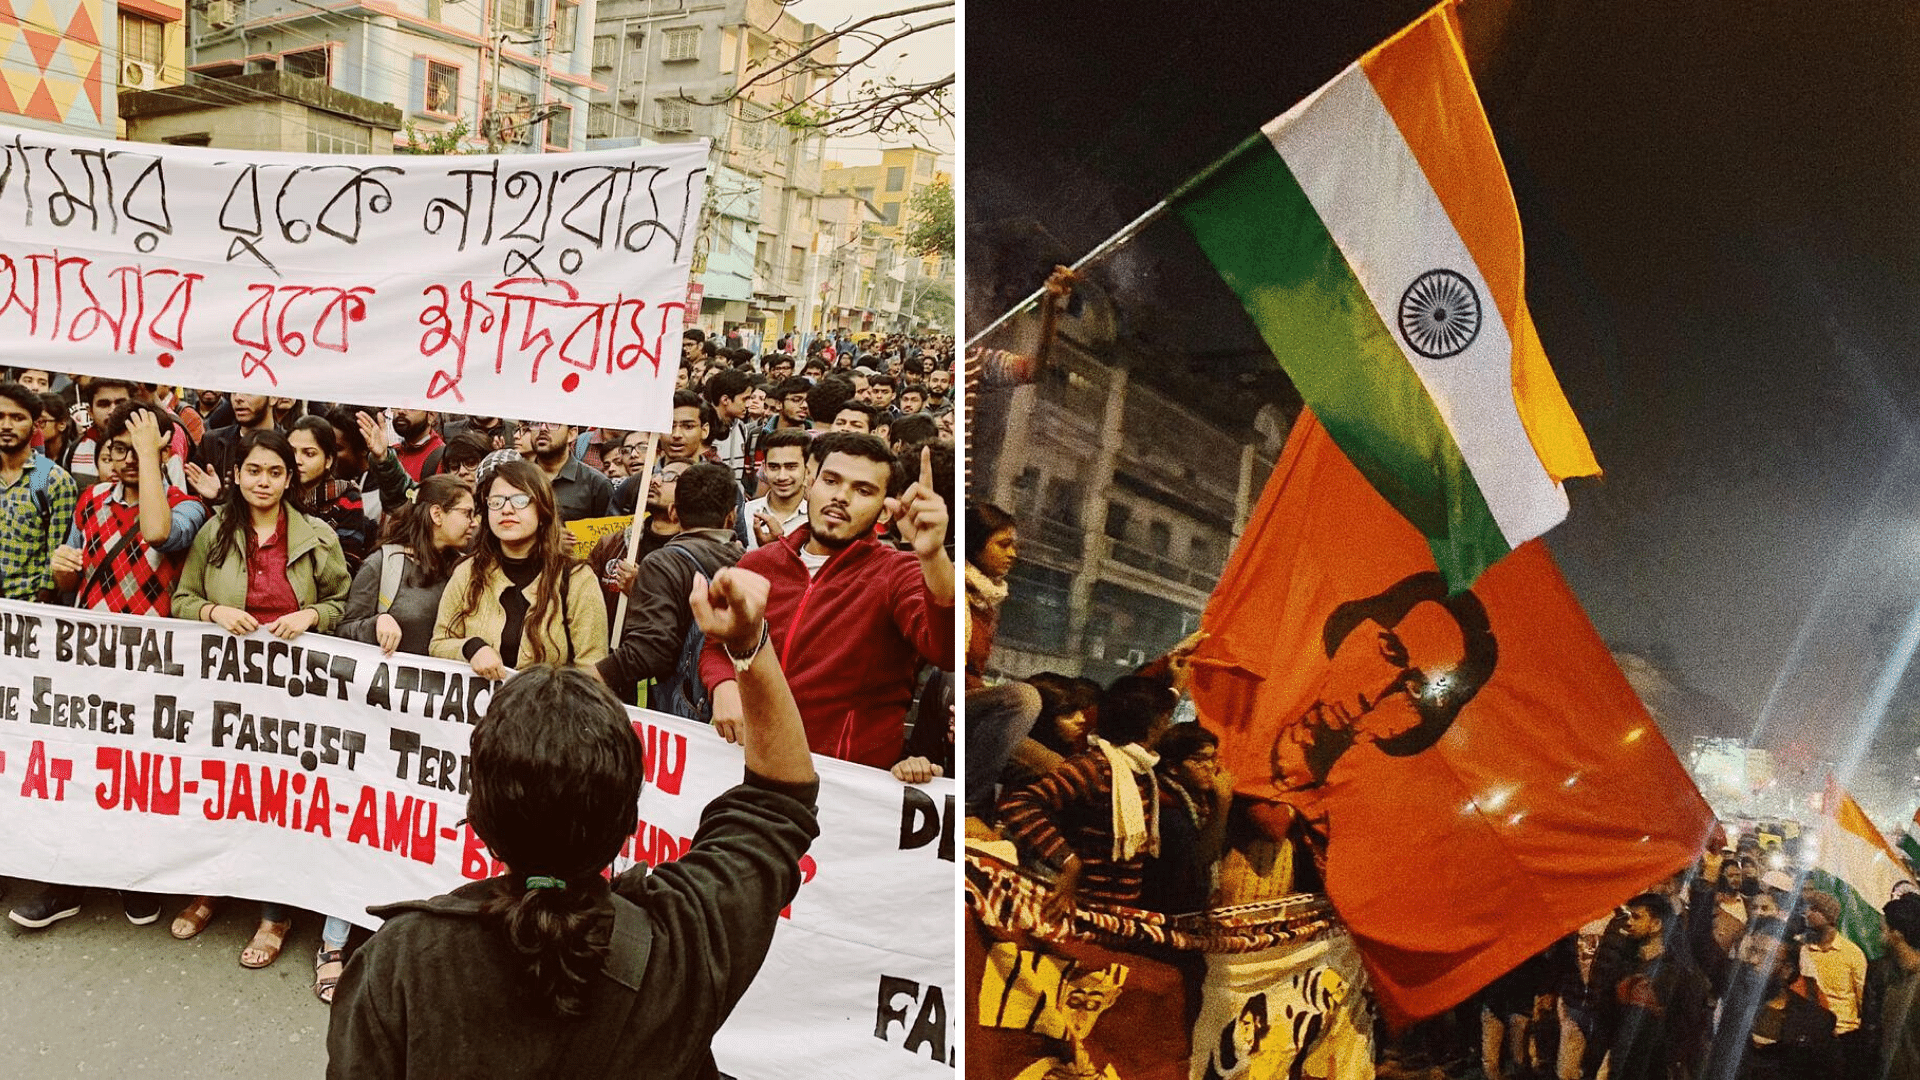 Students and ordinary citizens march in Kolkata against violent attacks in JNU by masked goons on the night of 5 January 2020.